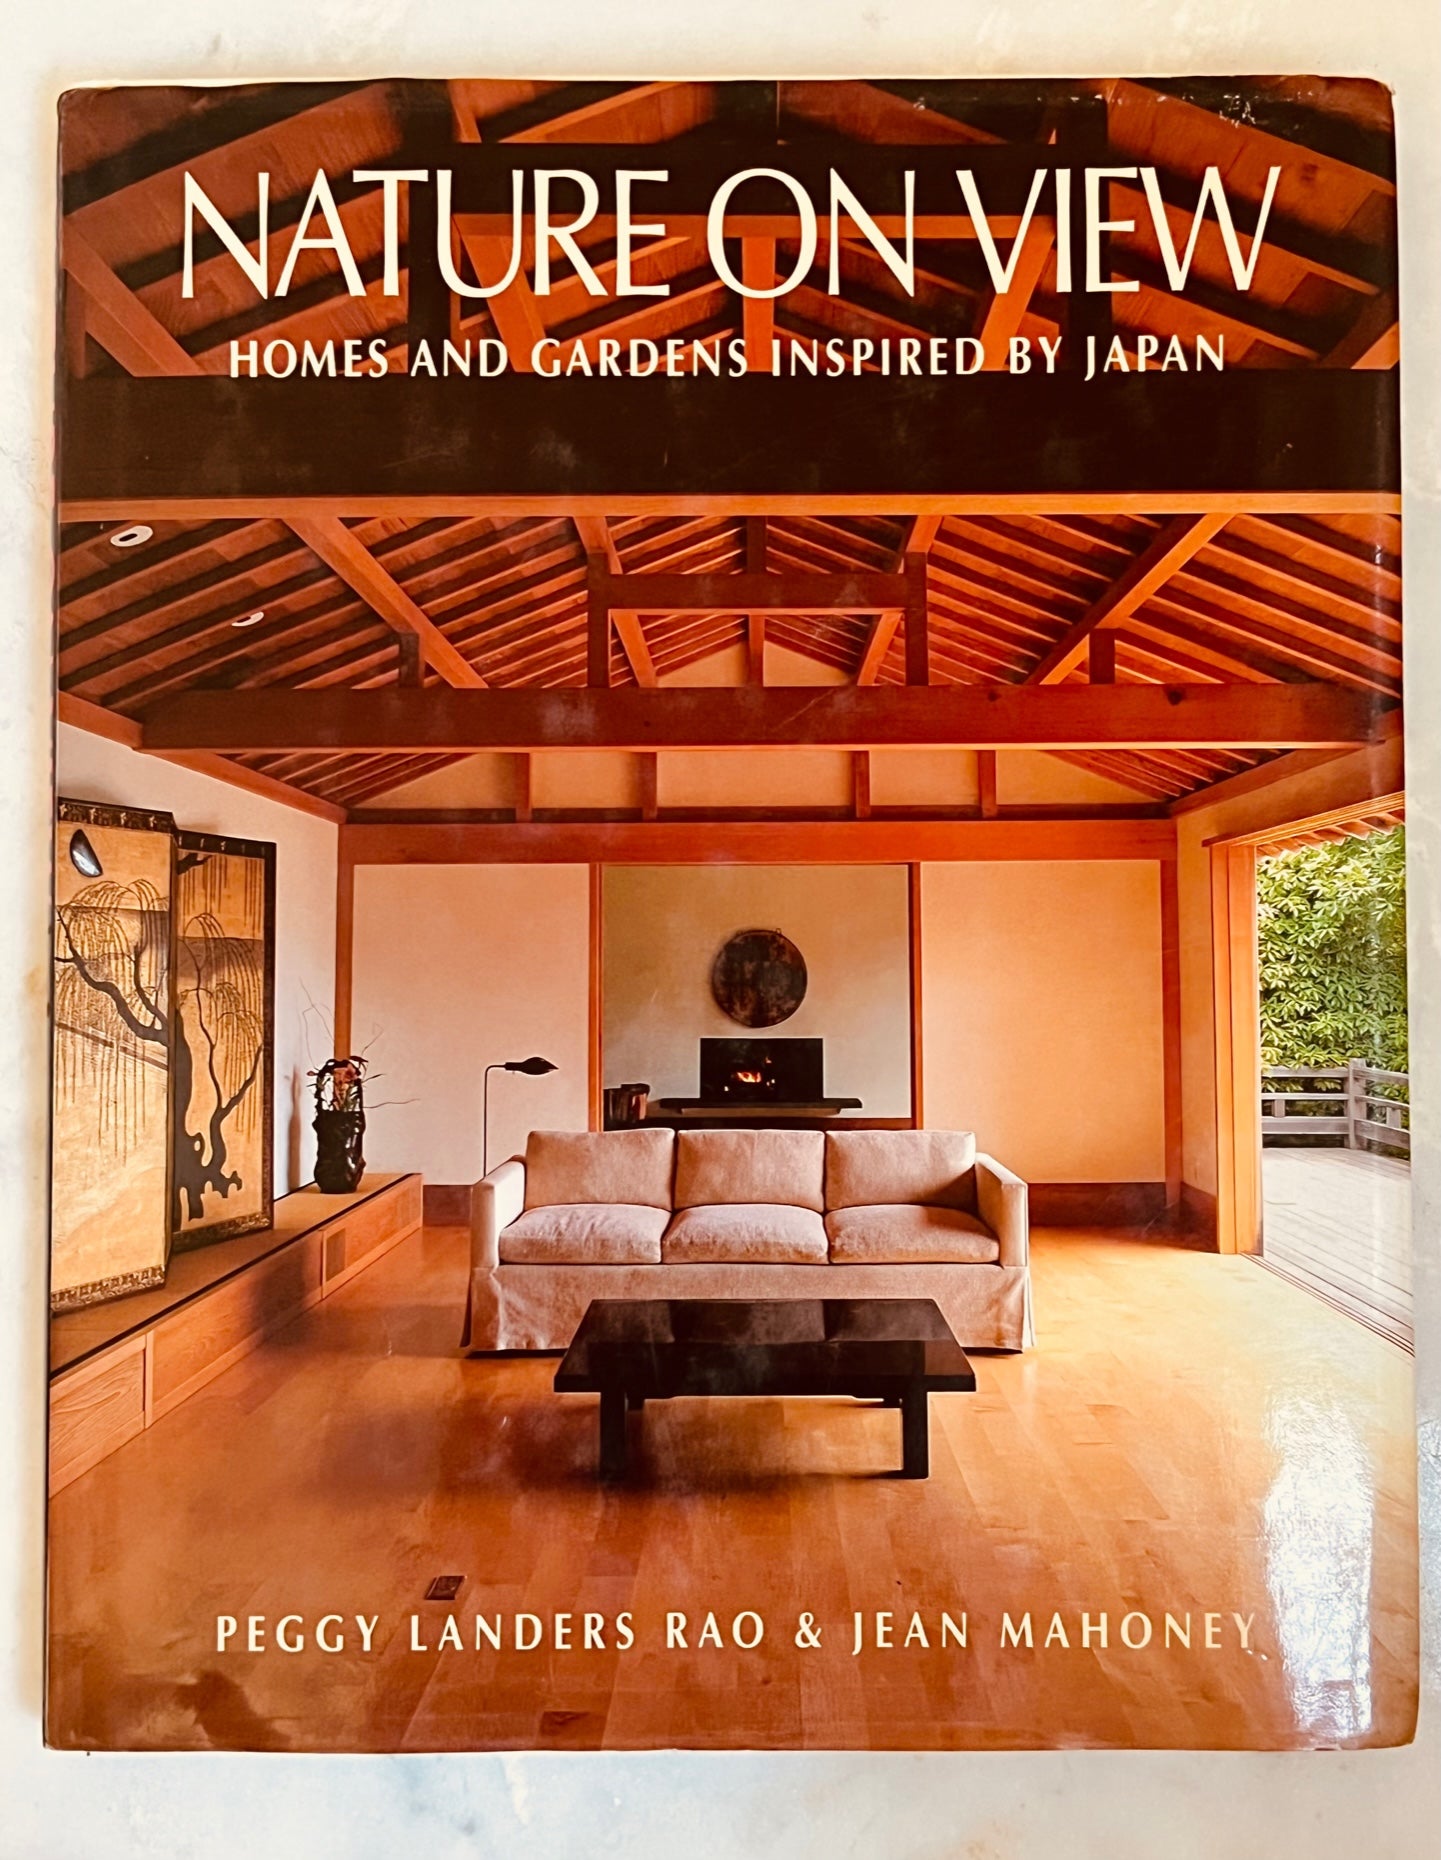 Nature on View (Homes & Gardens Inspired By Japan)